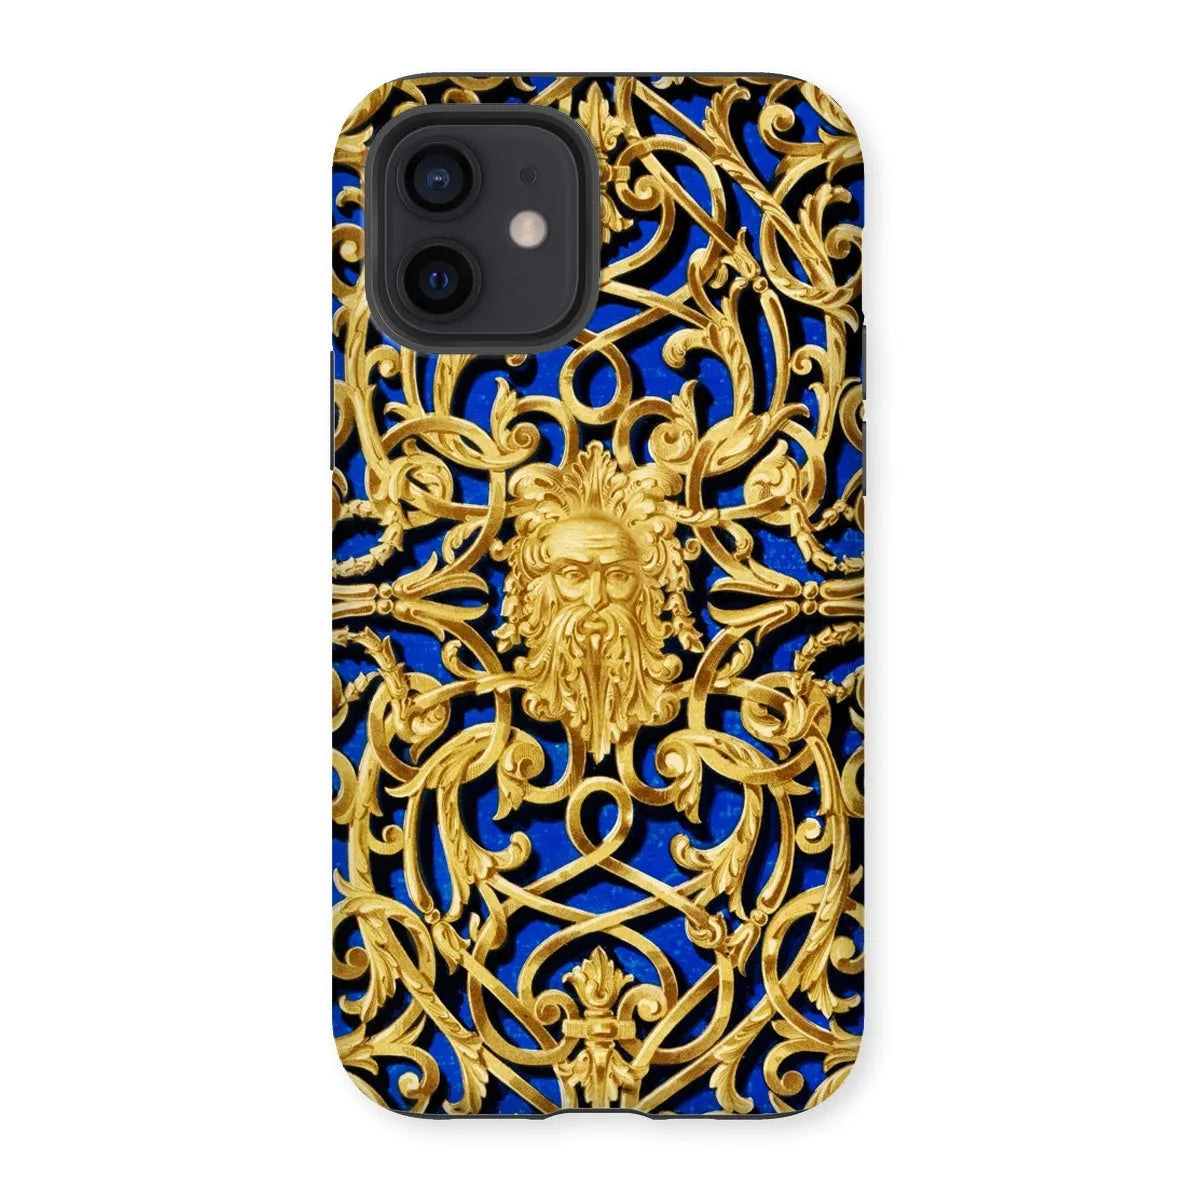 Gilded Gate Victorian Phone Case - Sir Matthew Digby Wyatt - Iphone 12 / Matte - Mobile Phone Cases - Aesthetic Art